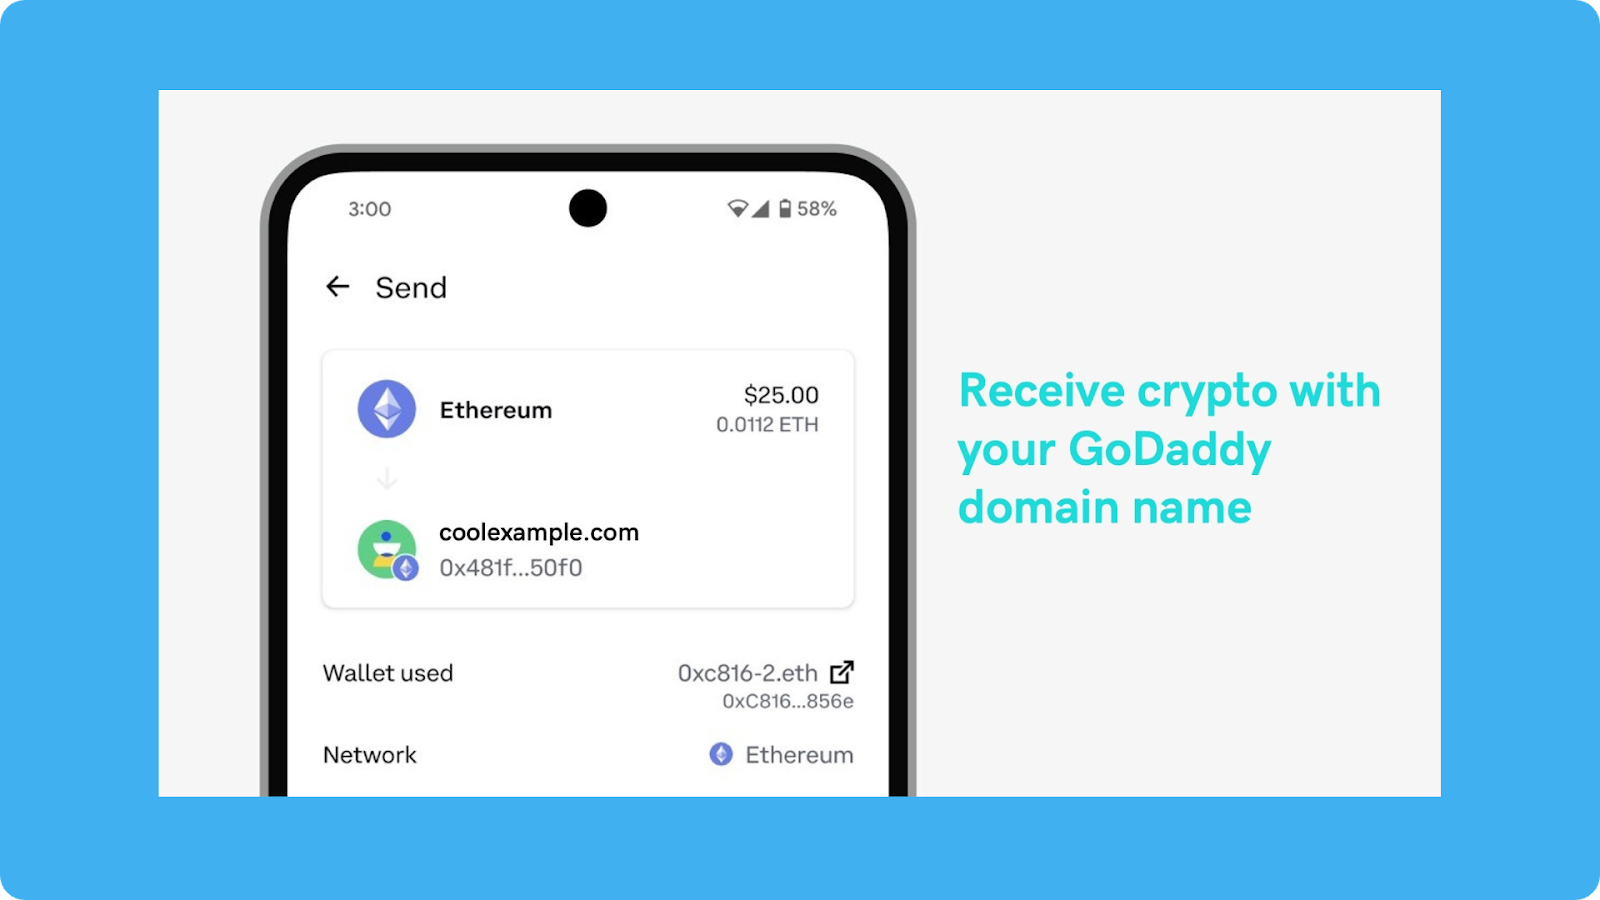 Discover if Godaddy Accepts Bitcoin Payments